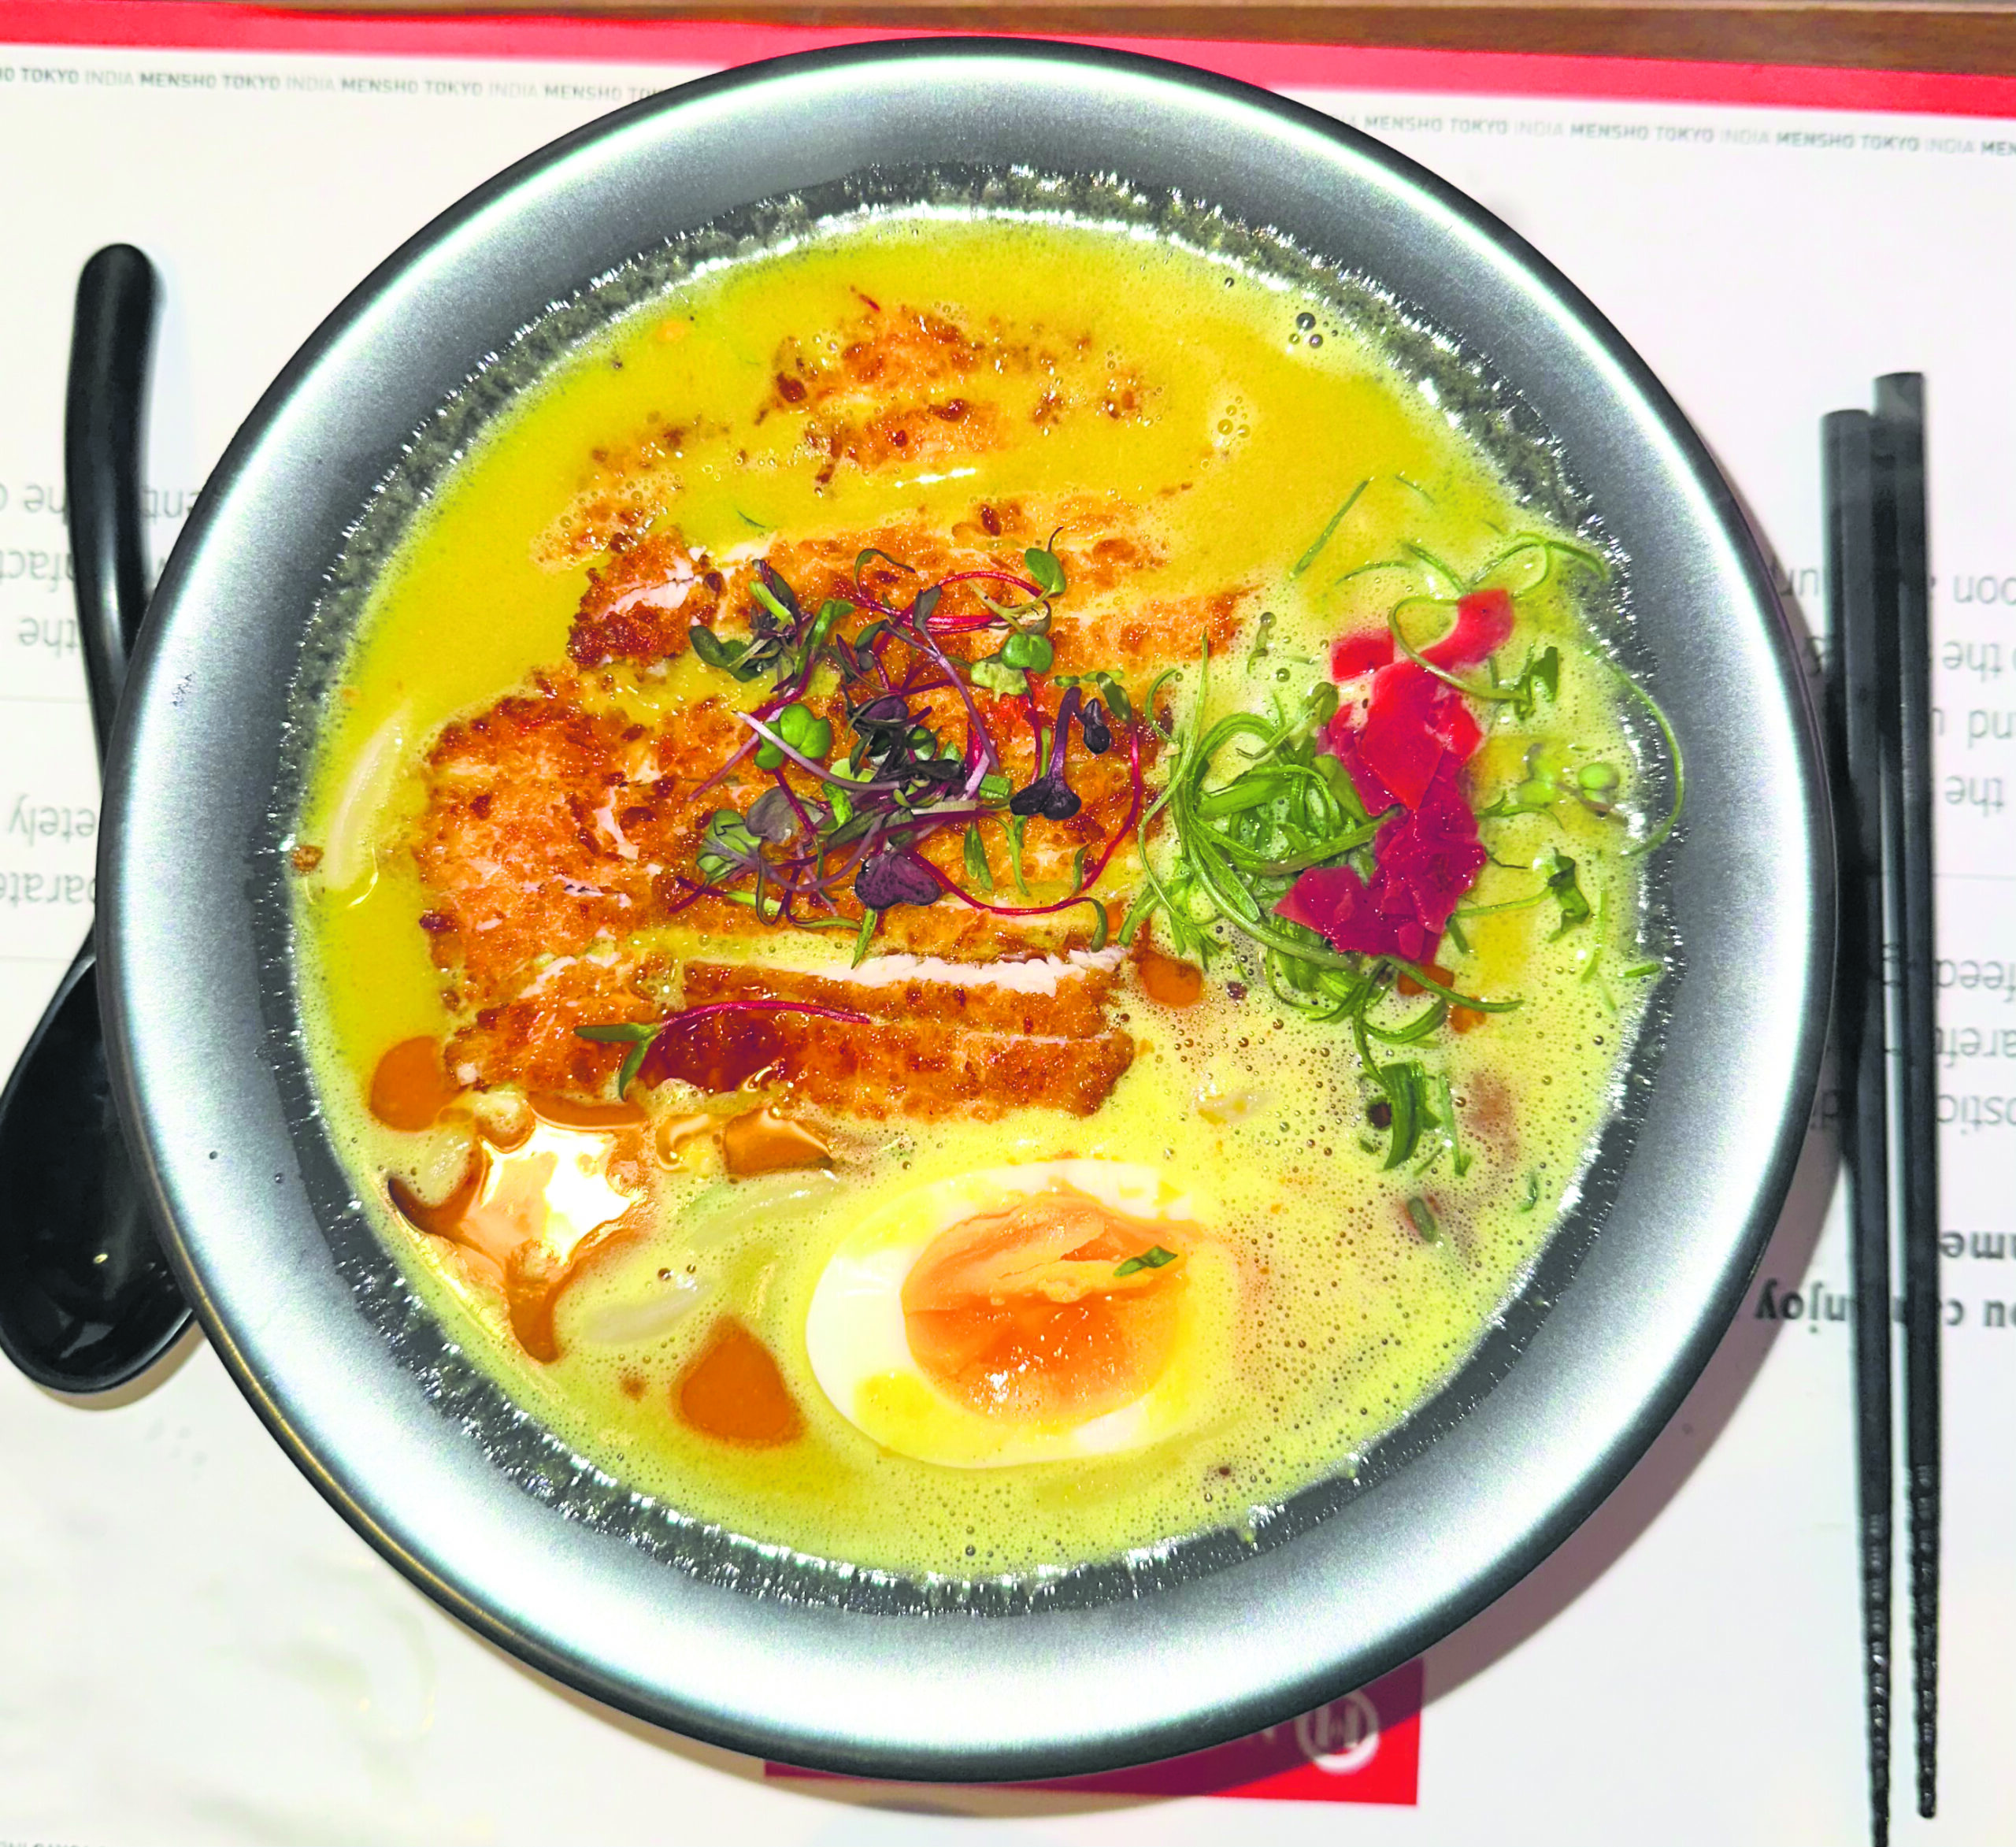 Tasting the Japanese Culinary Expertise at Mensho in Delhi